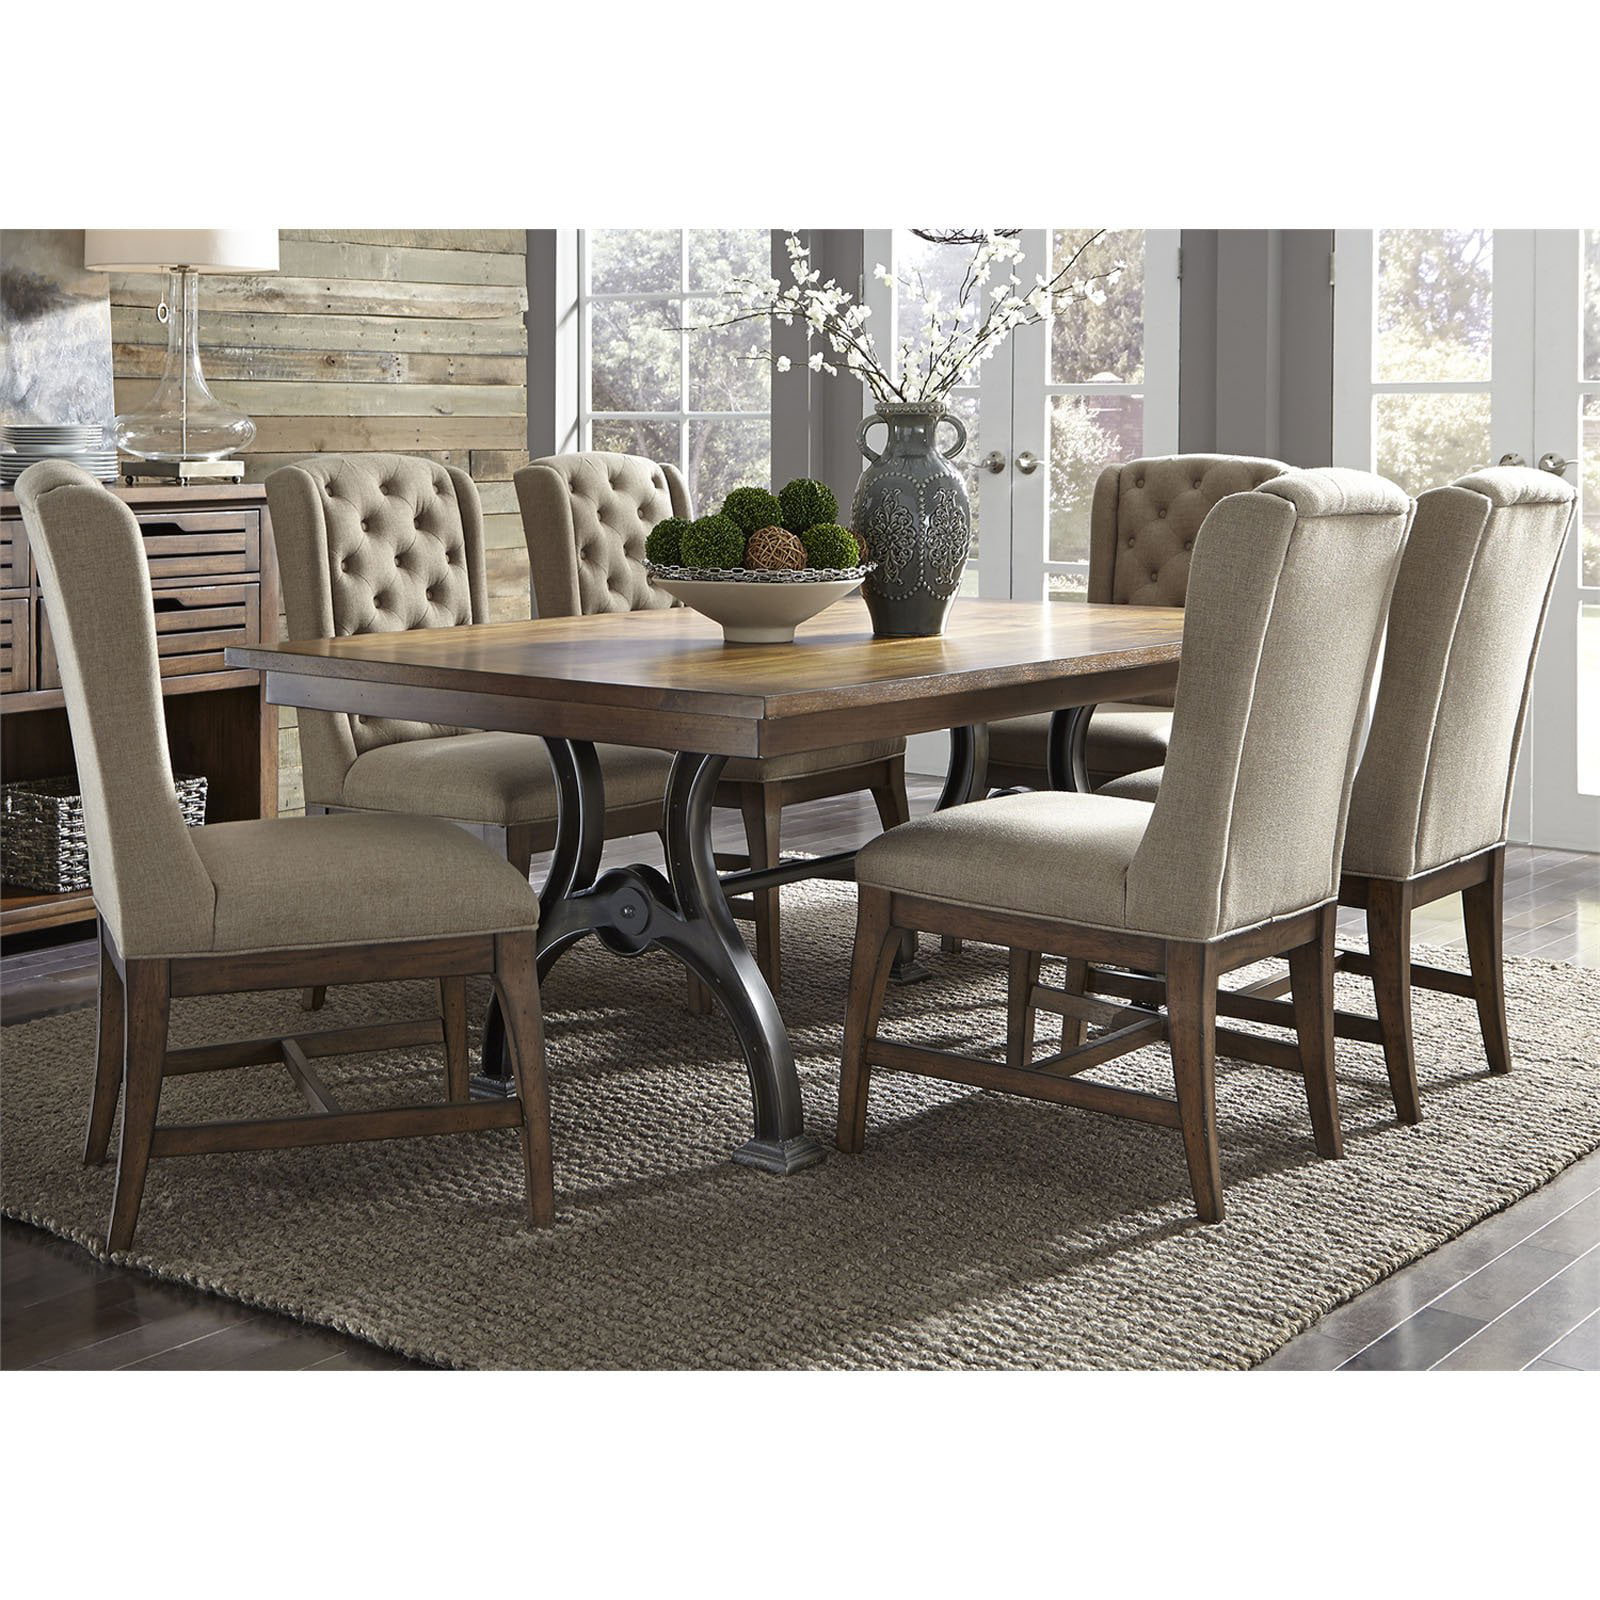 Liberty Furniture Industries Arlington House 7 Piece Upholstered ...